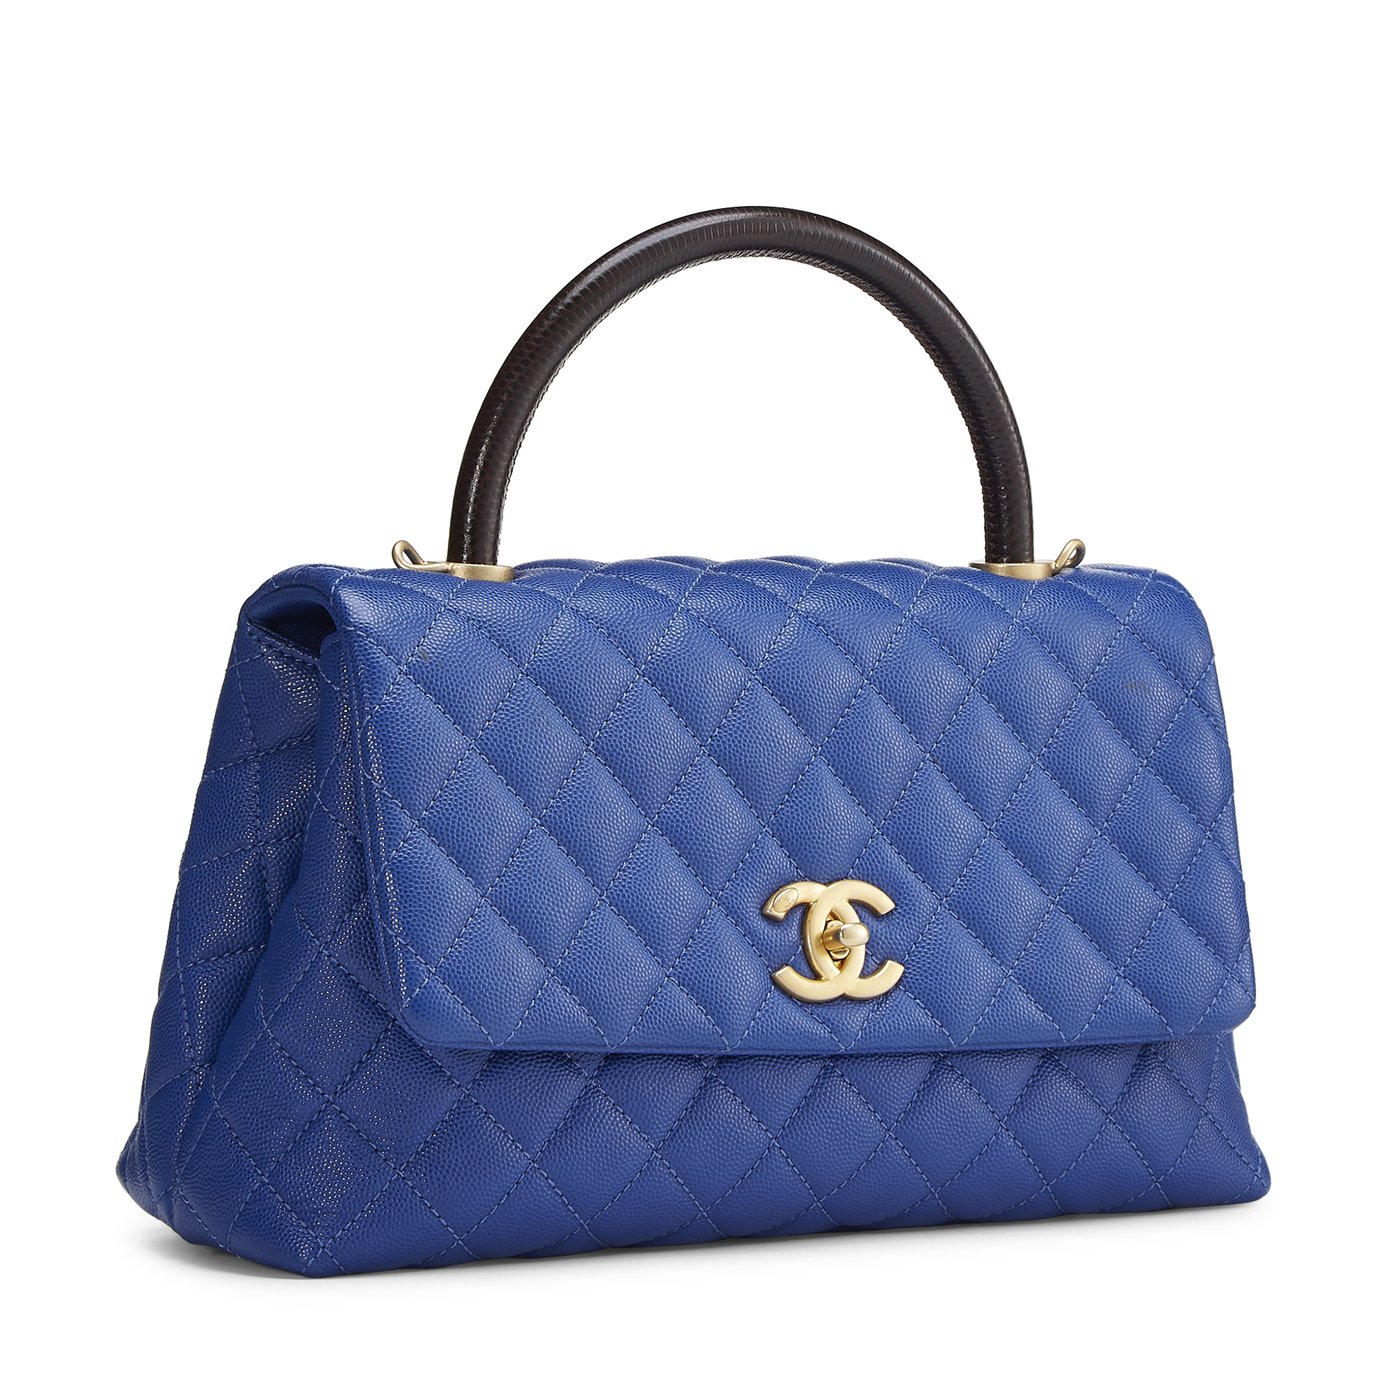 blue and black chanel bag authentic